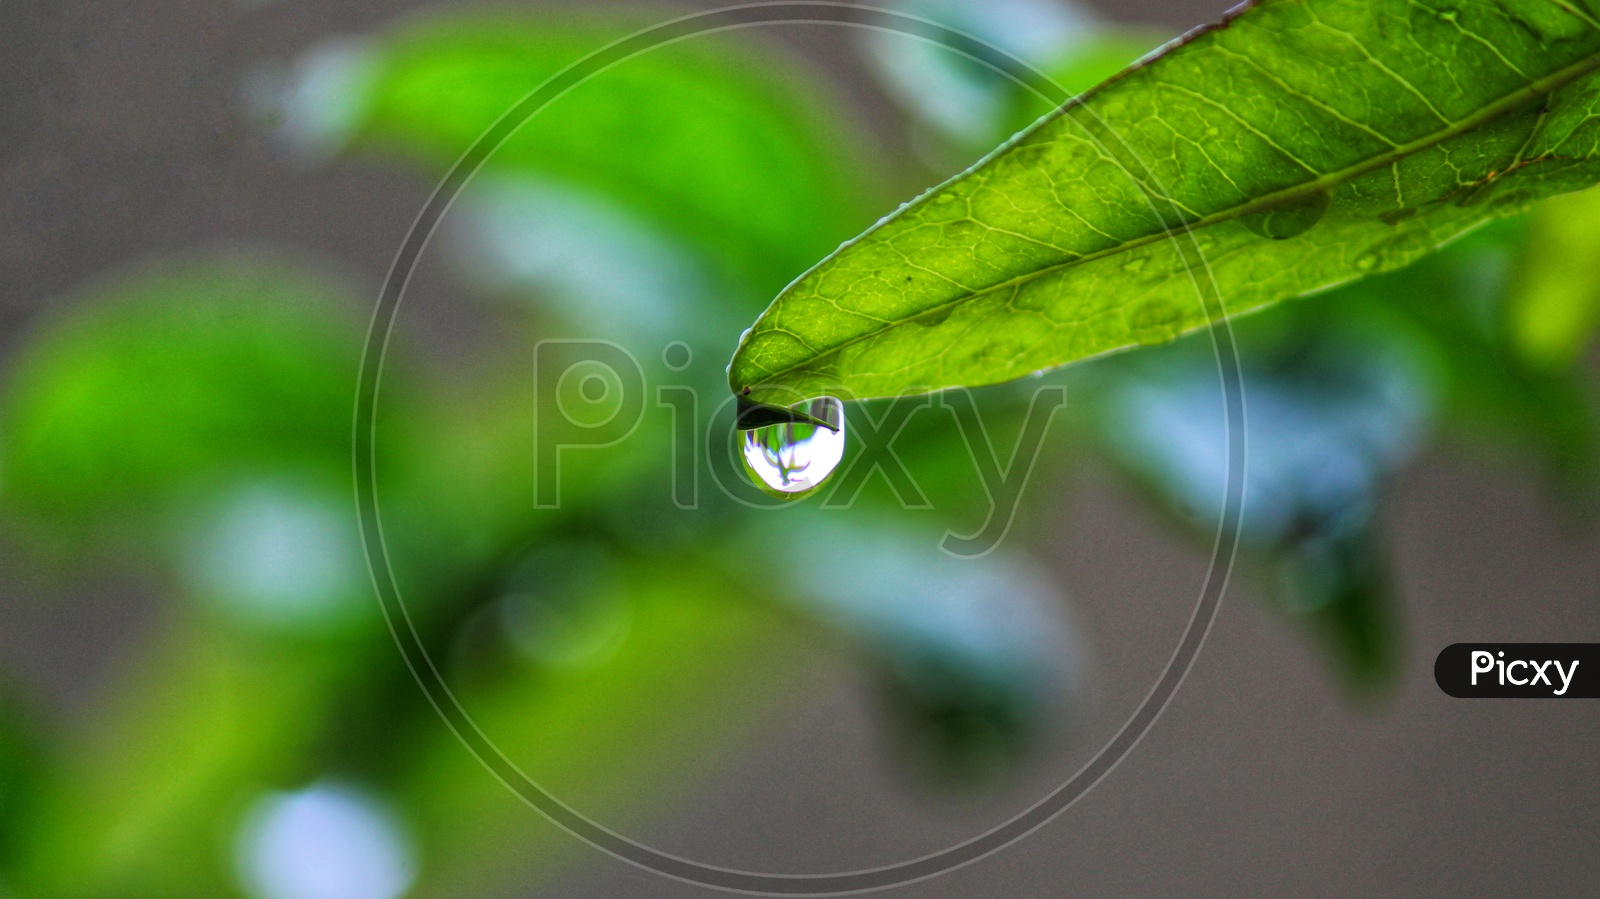 The eternal love between the water drop and leaf